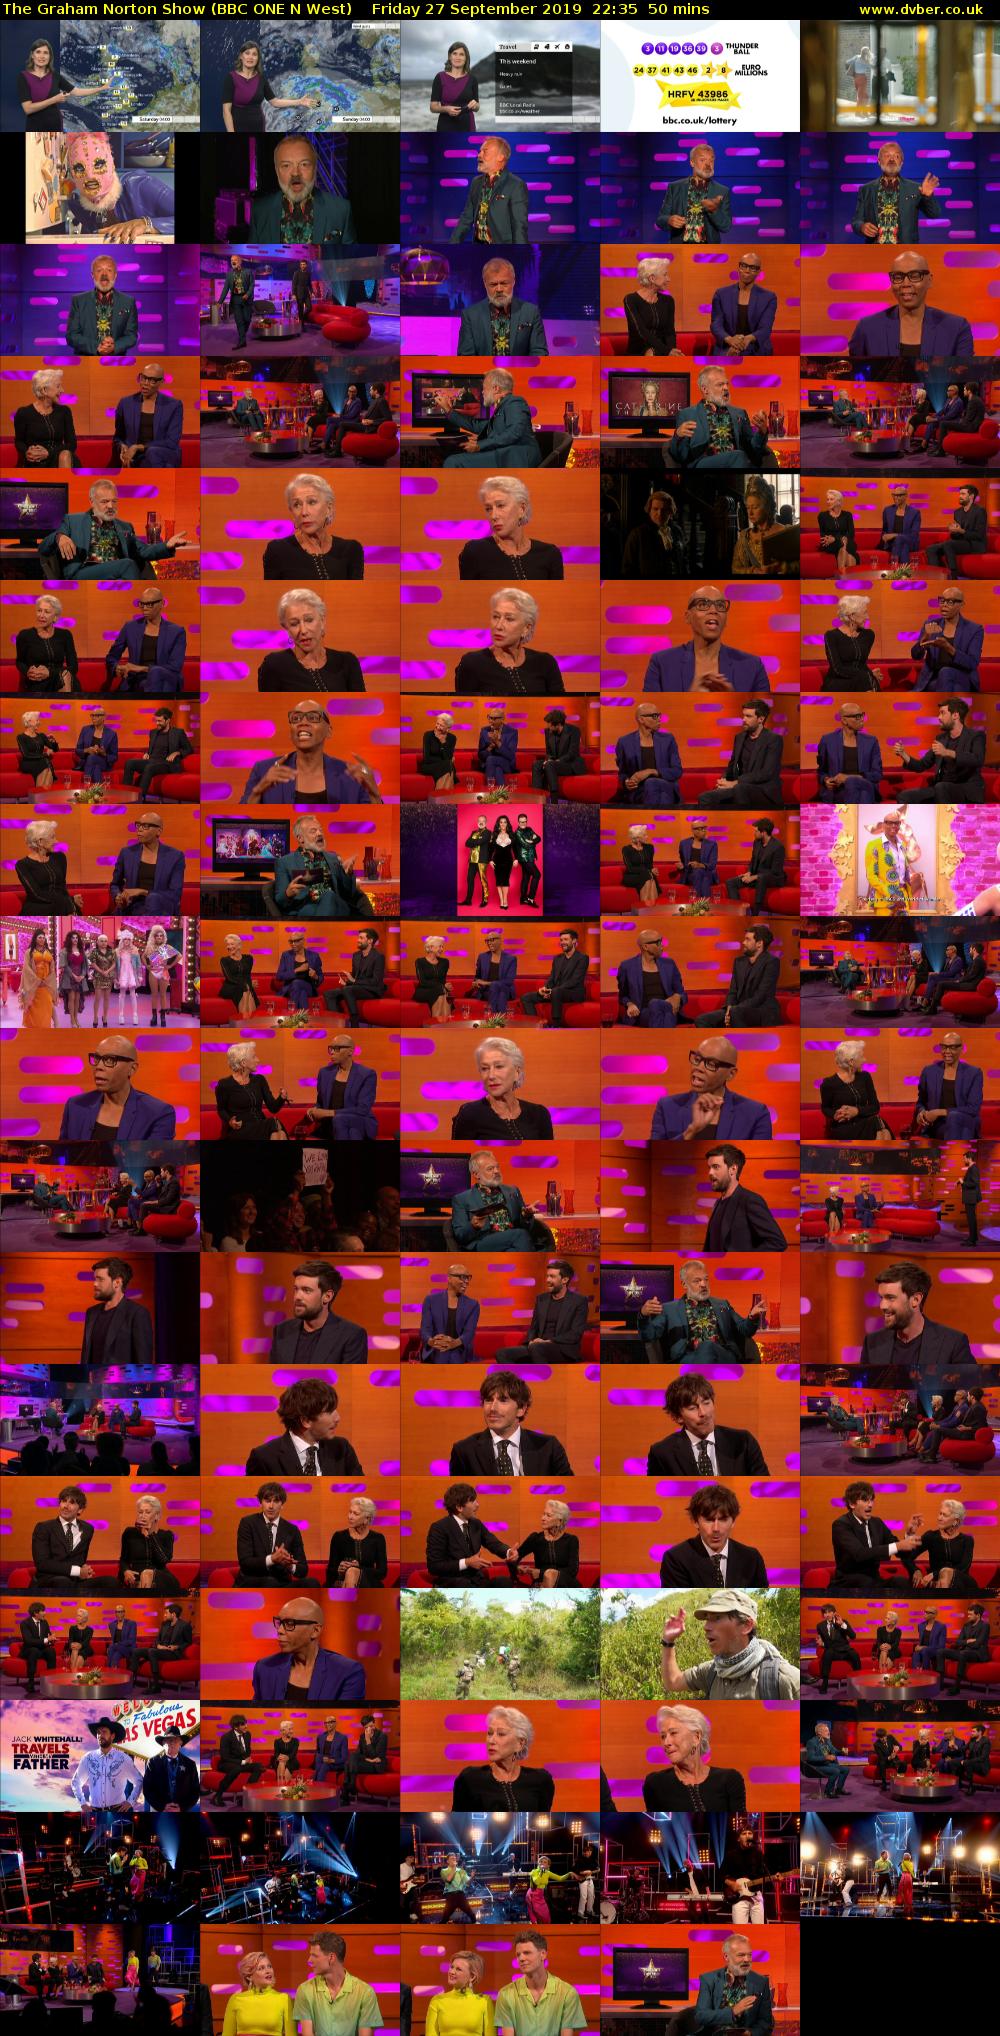 The Graham Norton Show (BBC ONE N West) Friday 27 September 2019 22:35 - 23:25